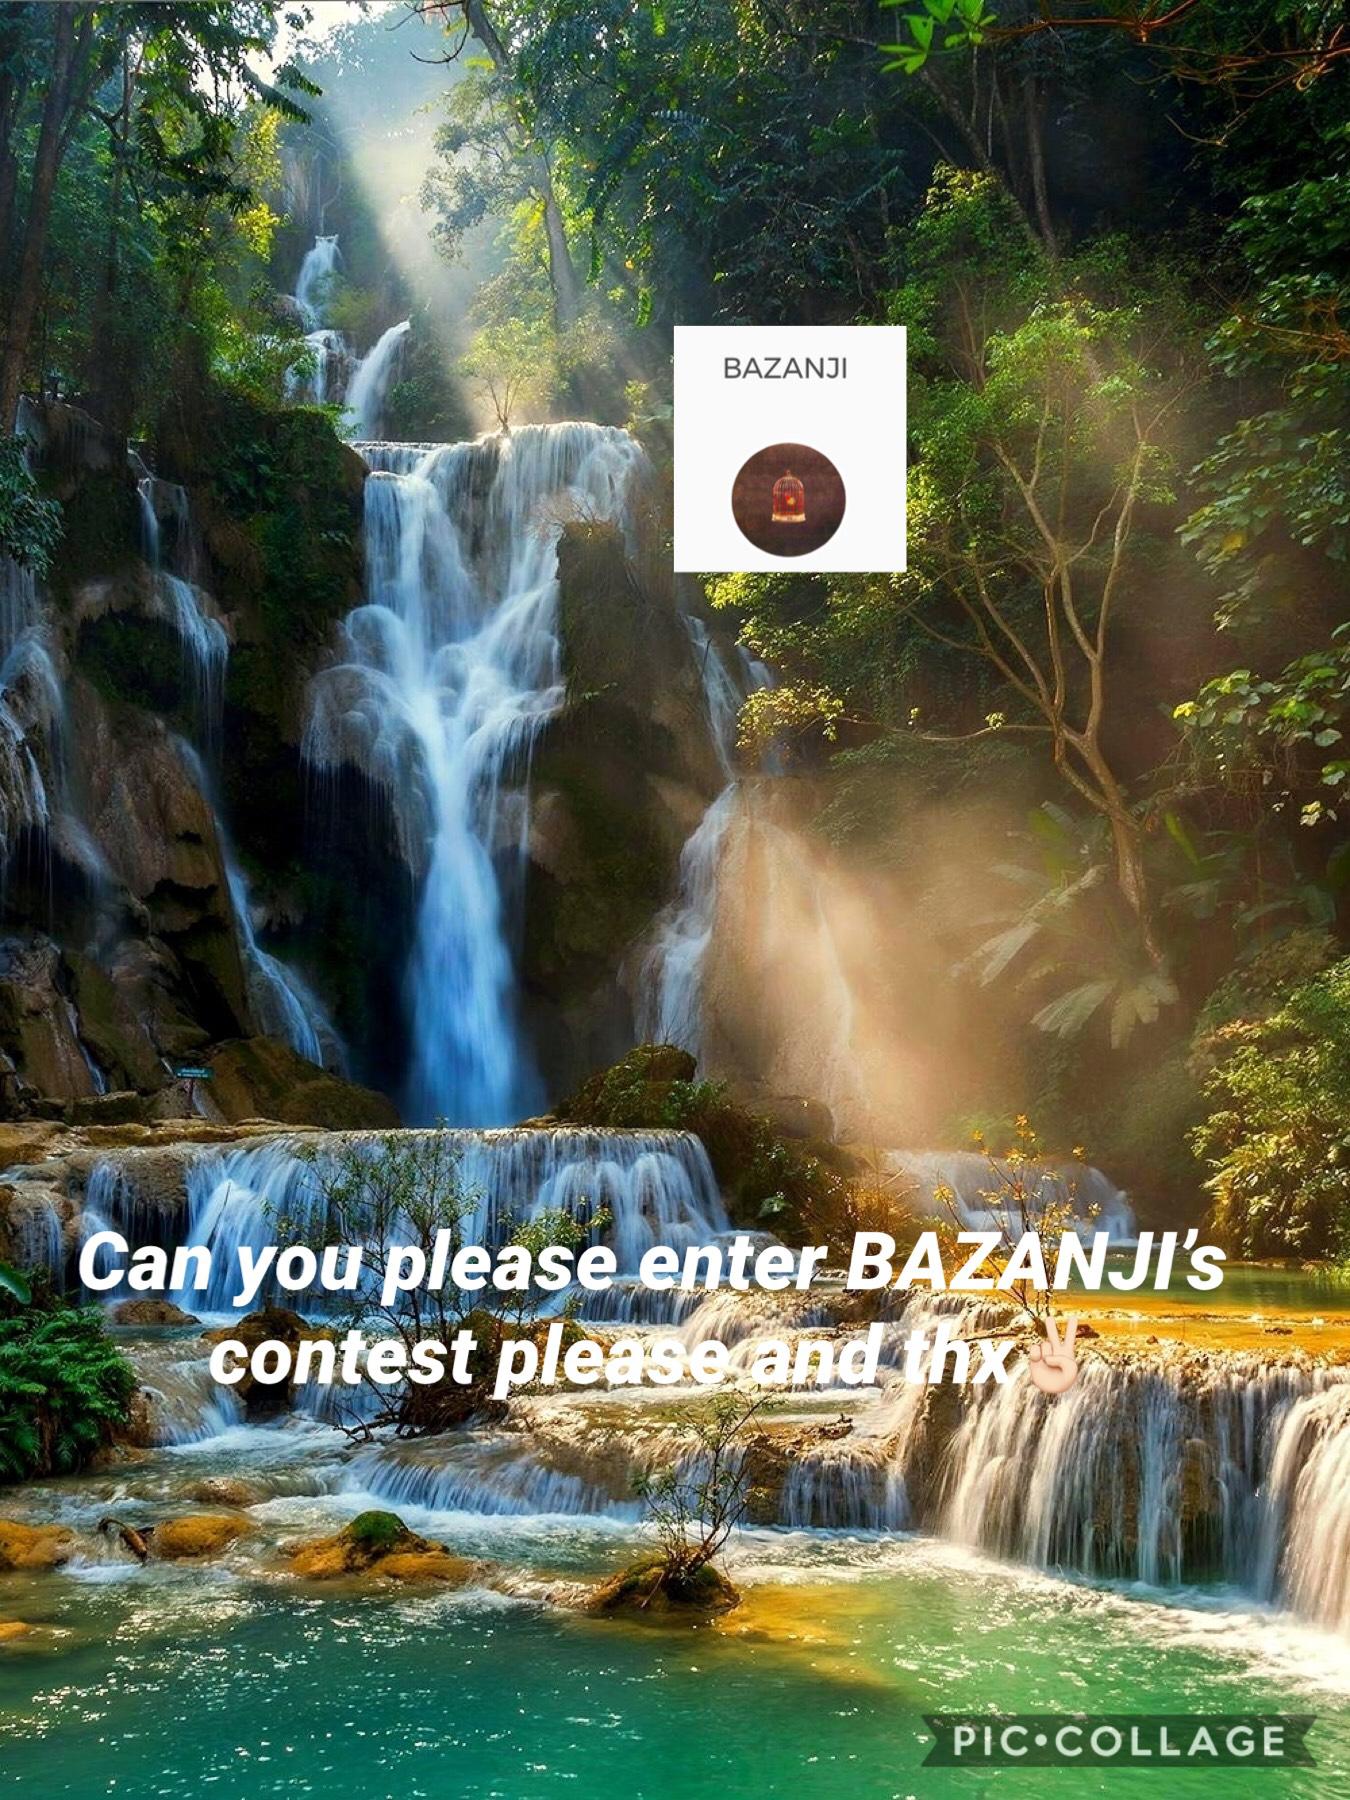 Can you please enter BAZANJI’s contest please thank you✌🏻